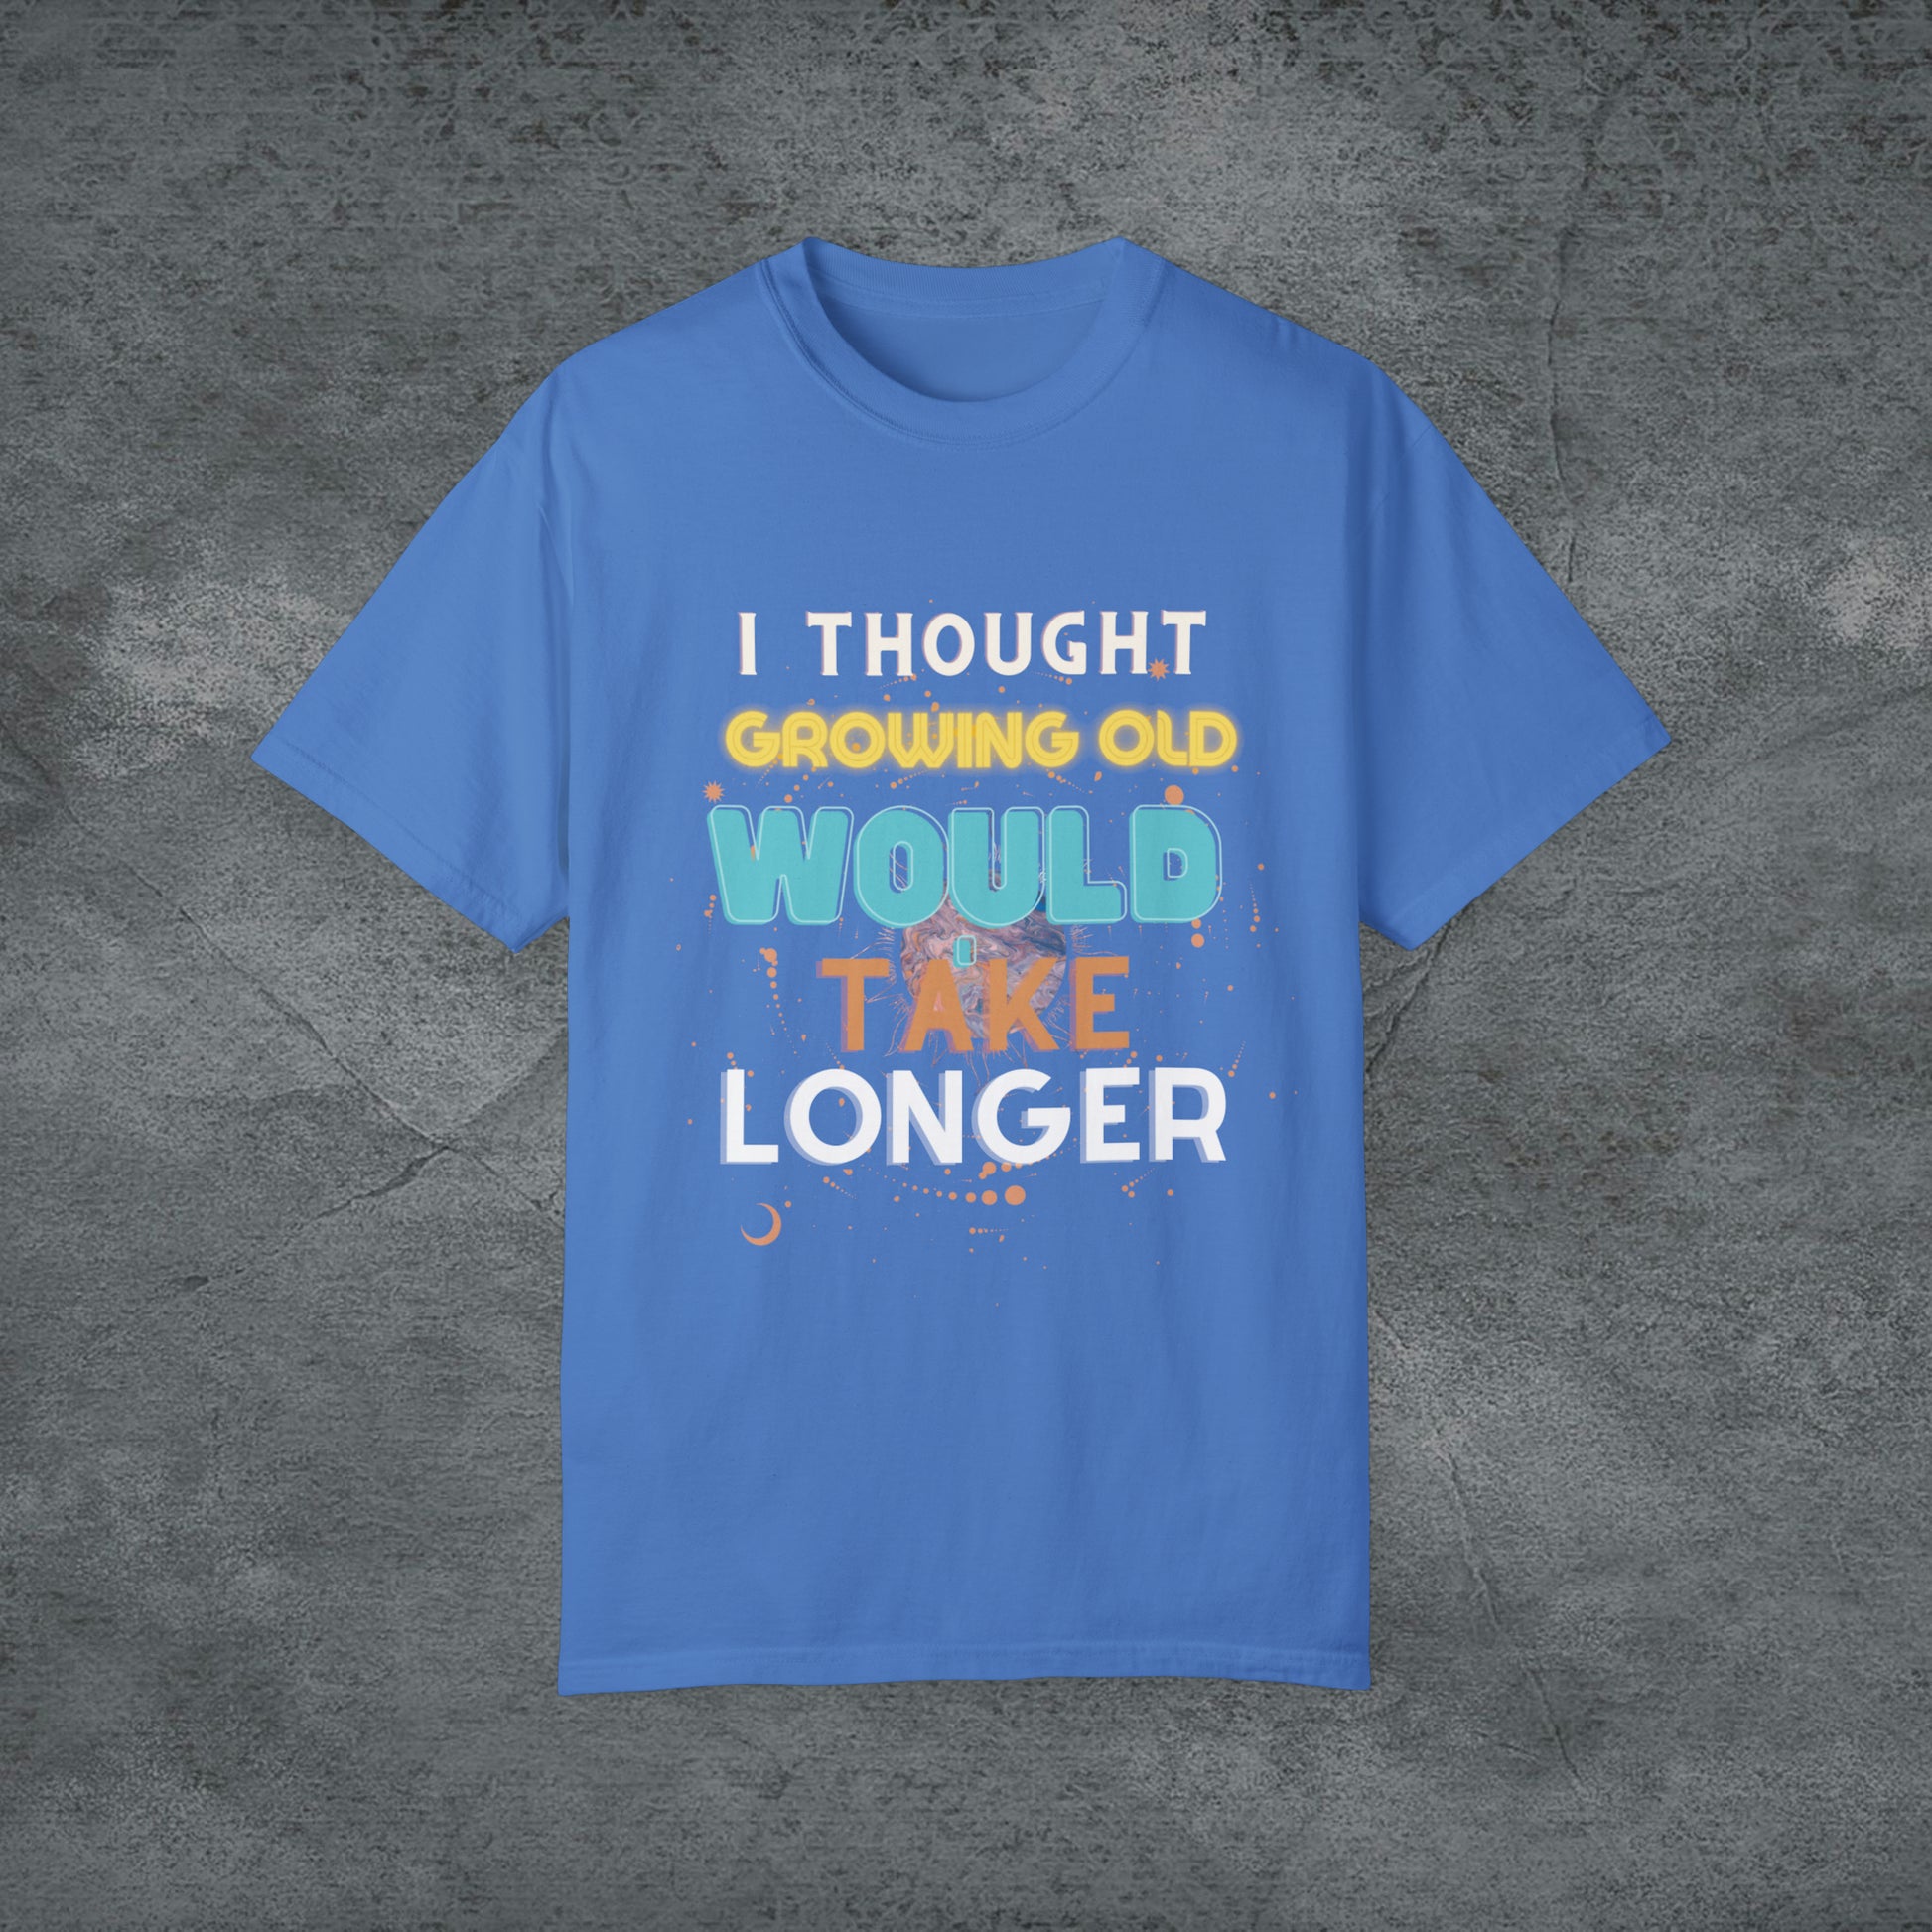 I Thought Growing Old Would Take Longer T-Shirt | Getting Older T Shirt | Funny Adulting T-Shirt | Old Age T Shirt | Old Person T Shirt T-Shirt Royal Caribe S 